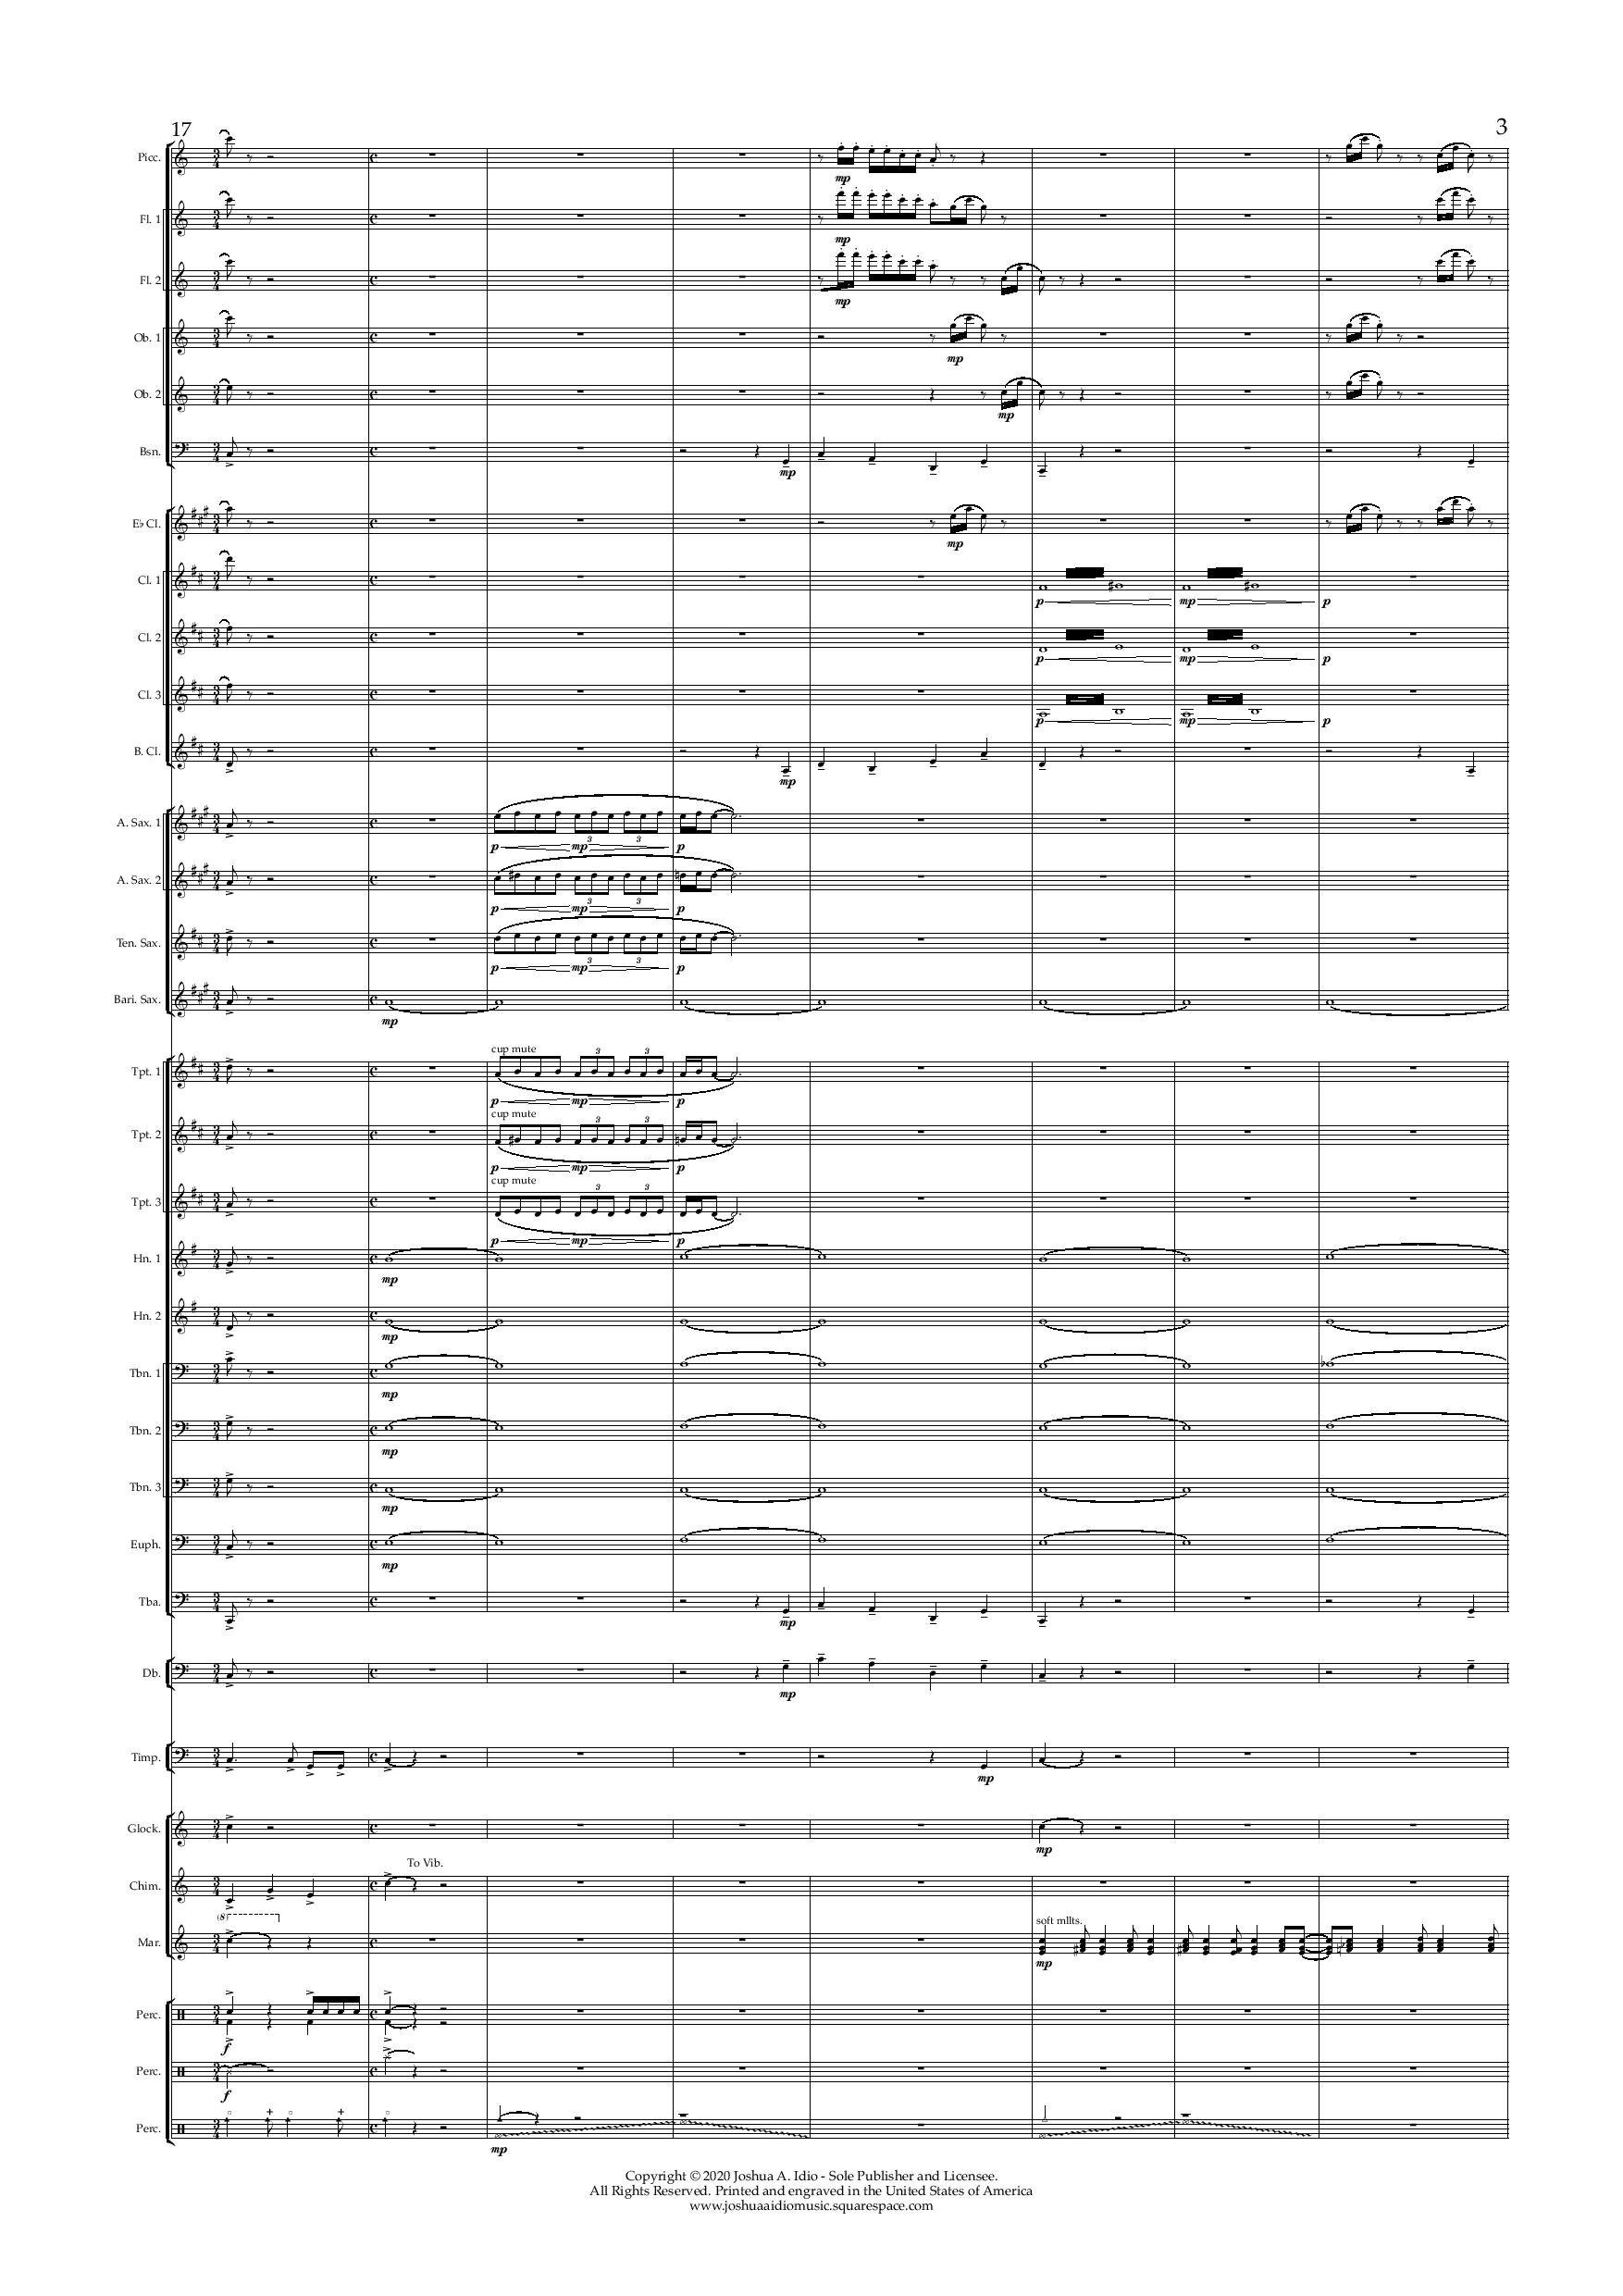 The Cruise Line Dream - Conductor s Score-page-003.jpg